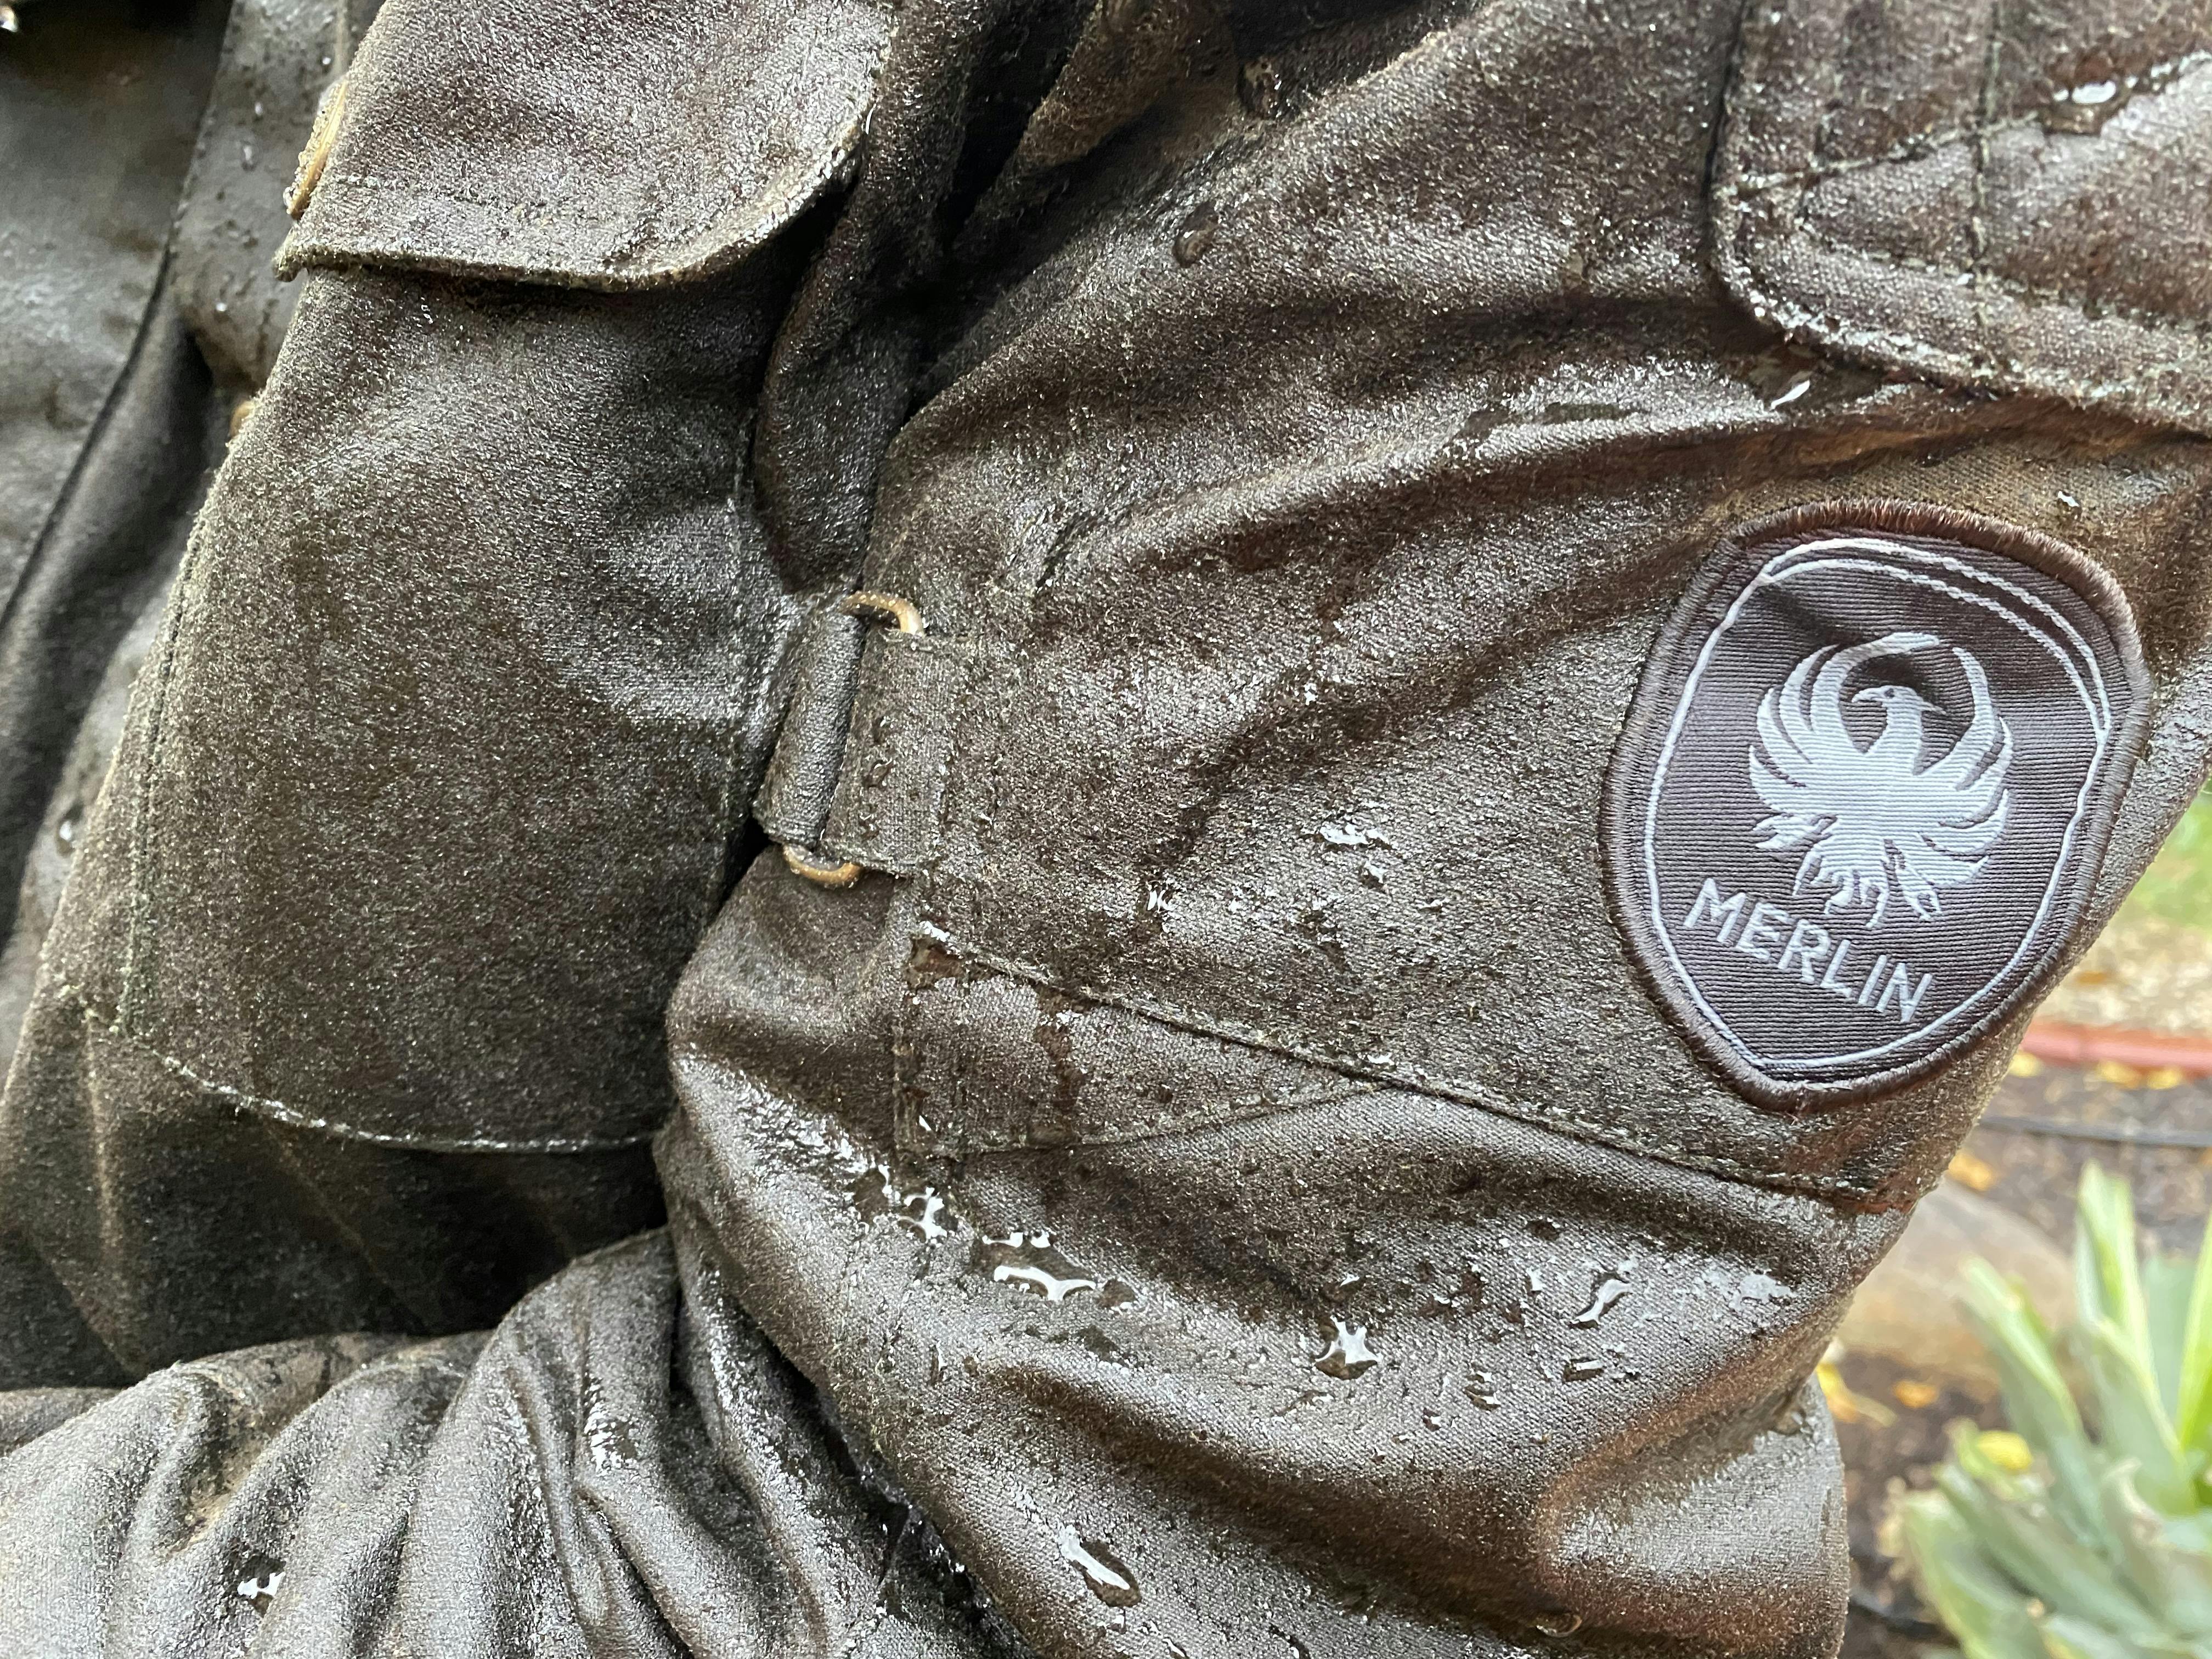 A close up of a wet arm of the Merlin Barton Jacket